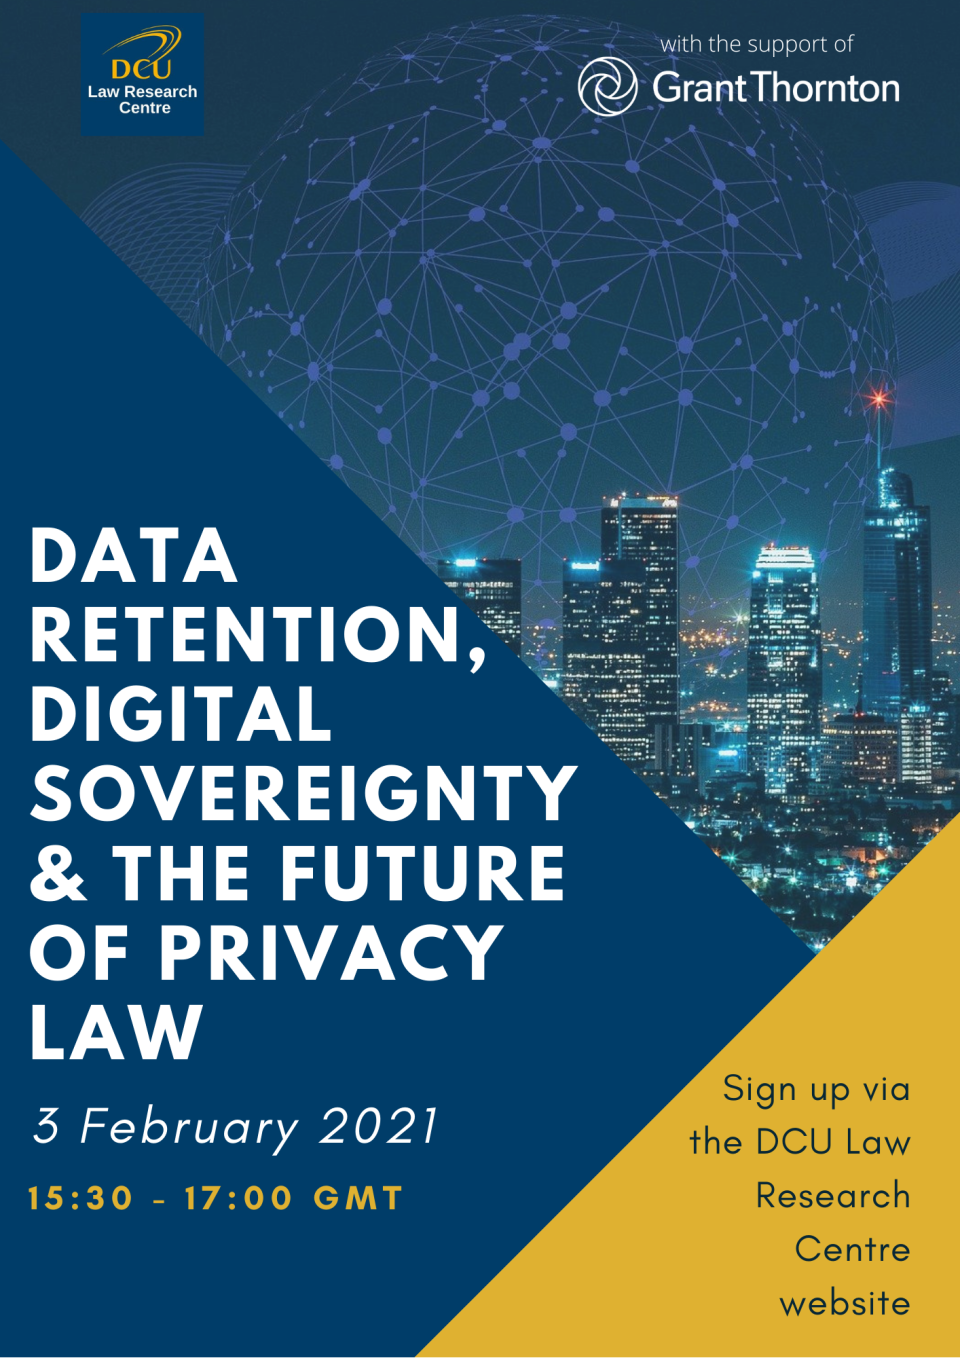 Data Retention, Digital Sovereignty & the Future of Privacy Law